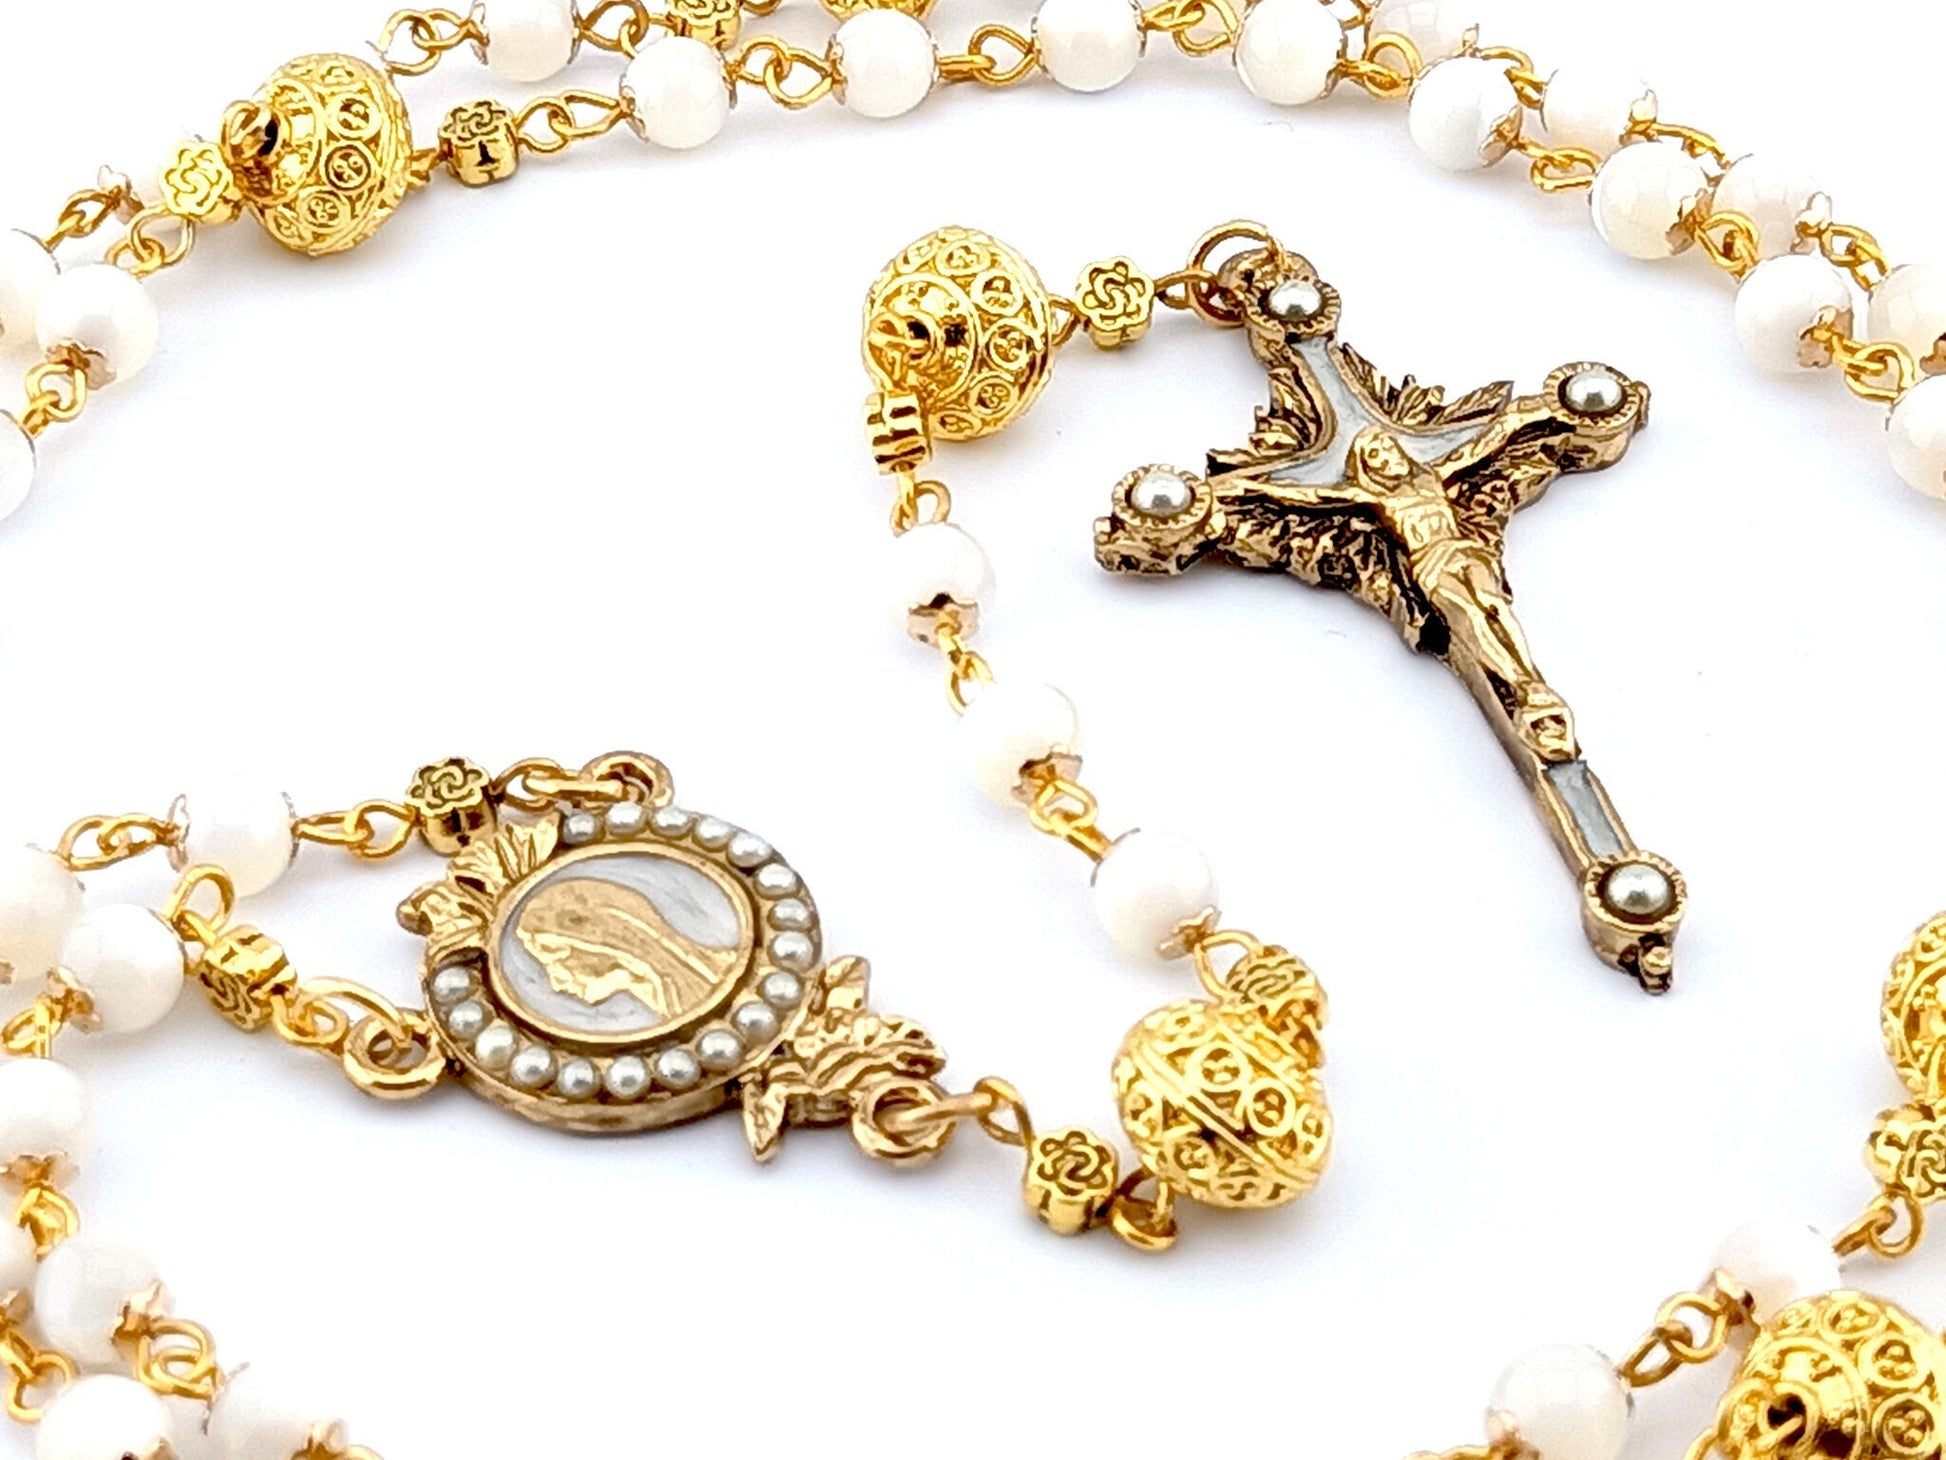 Our Lady of Grace unique rosary beads with mother of pearl beads, golden crucifix, pater beads and centre medal.